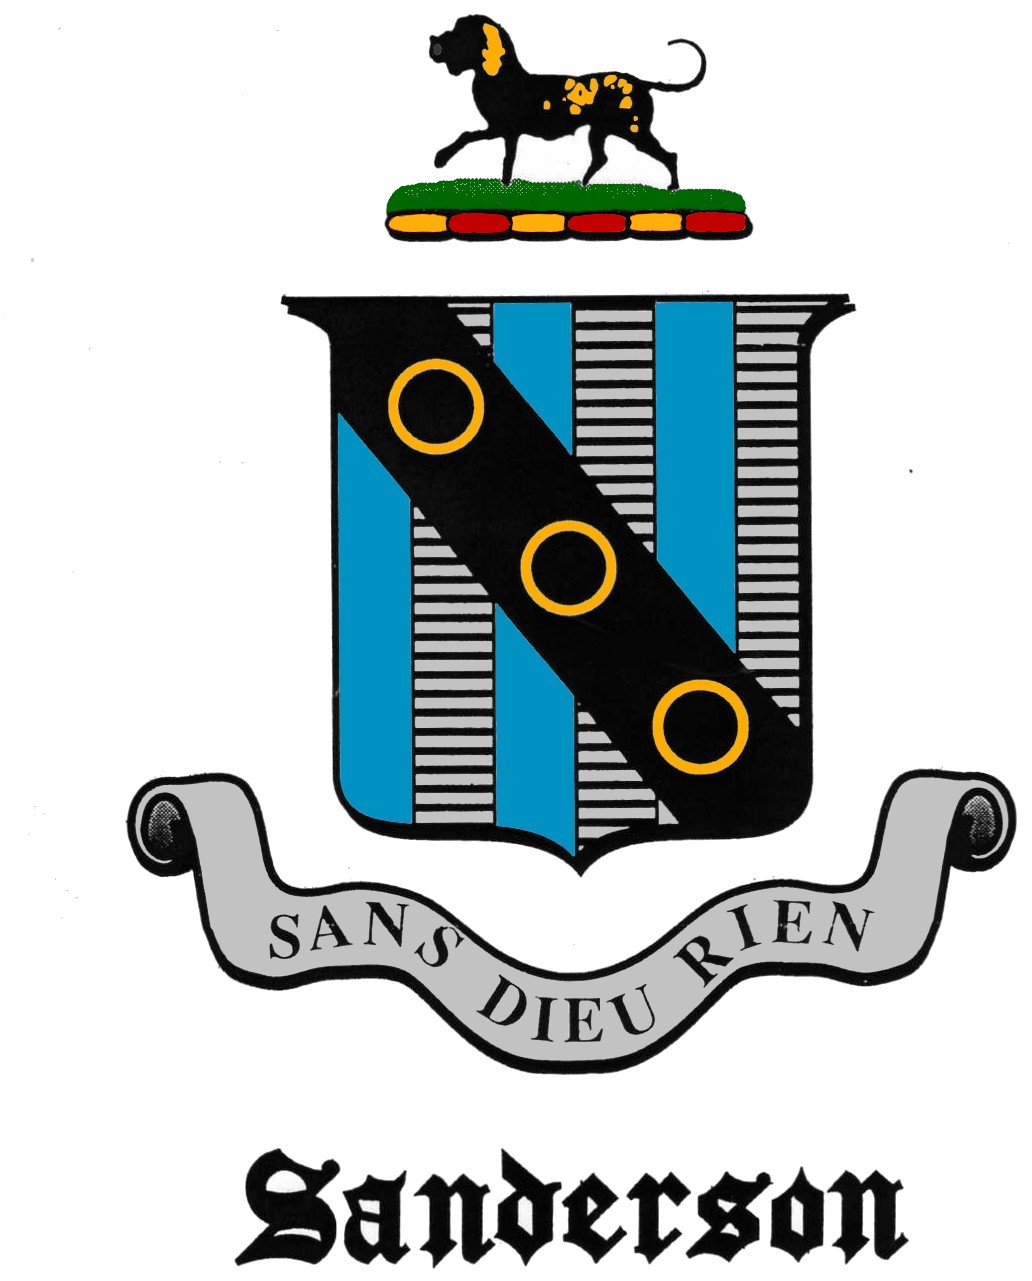 Sanderson family coat of arms